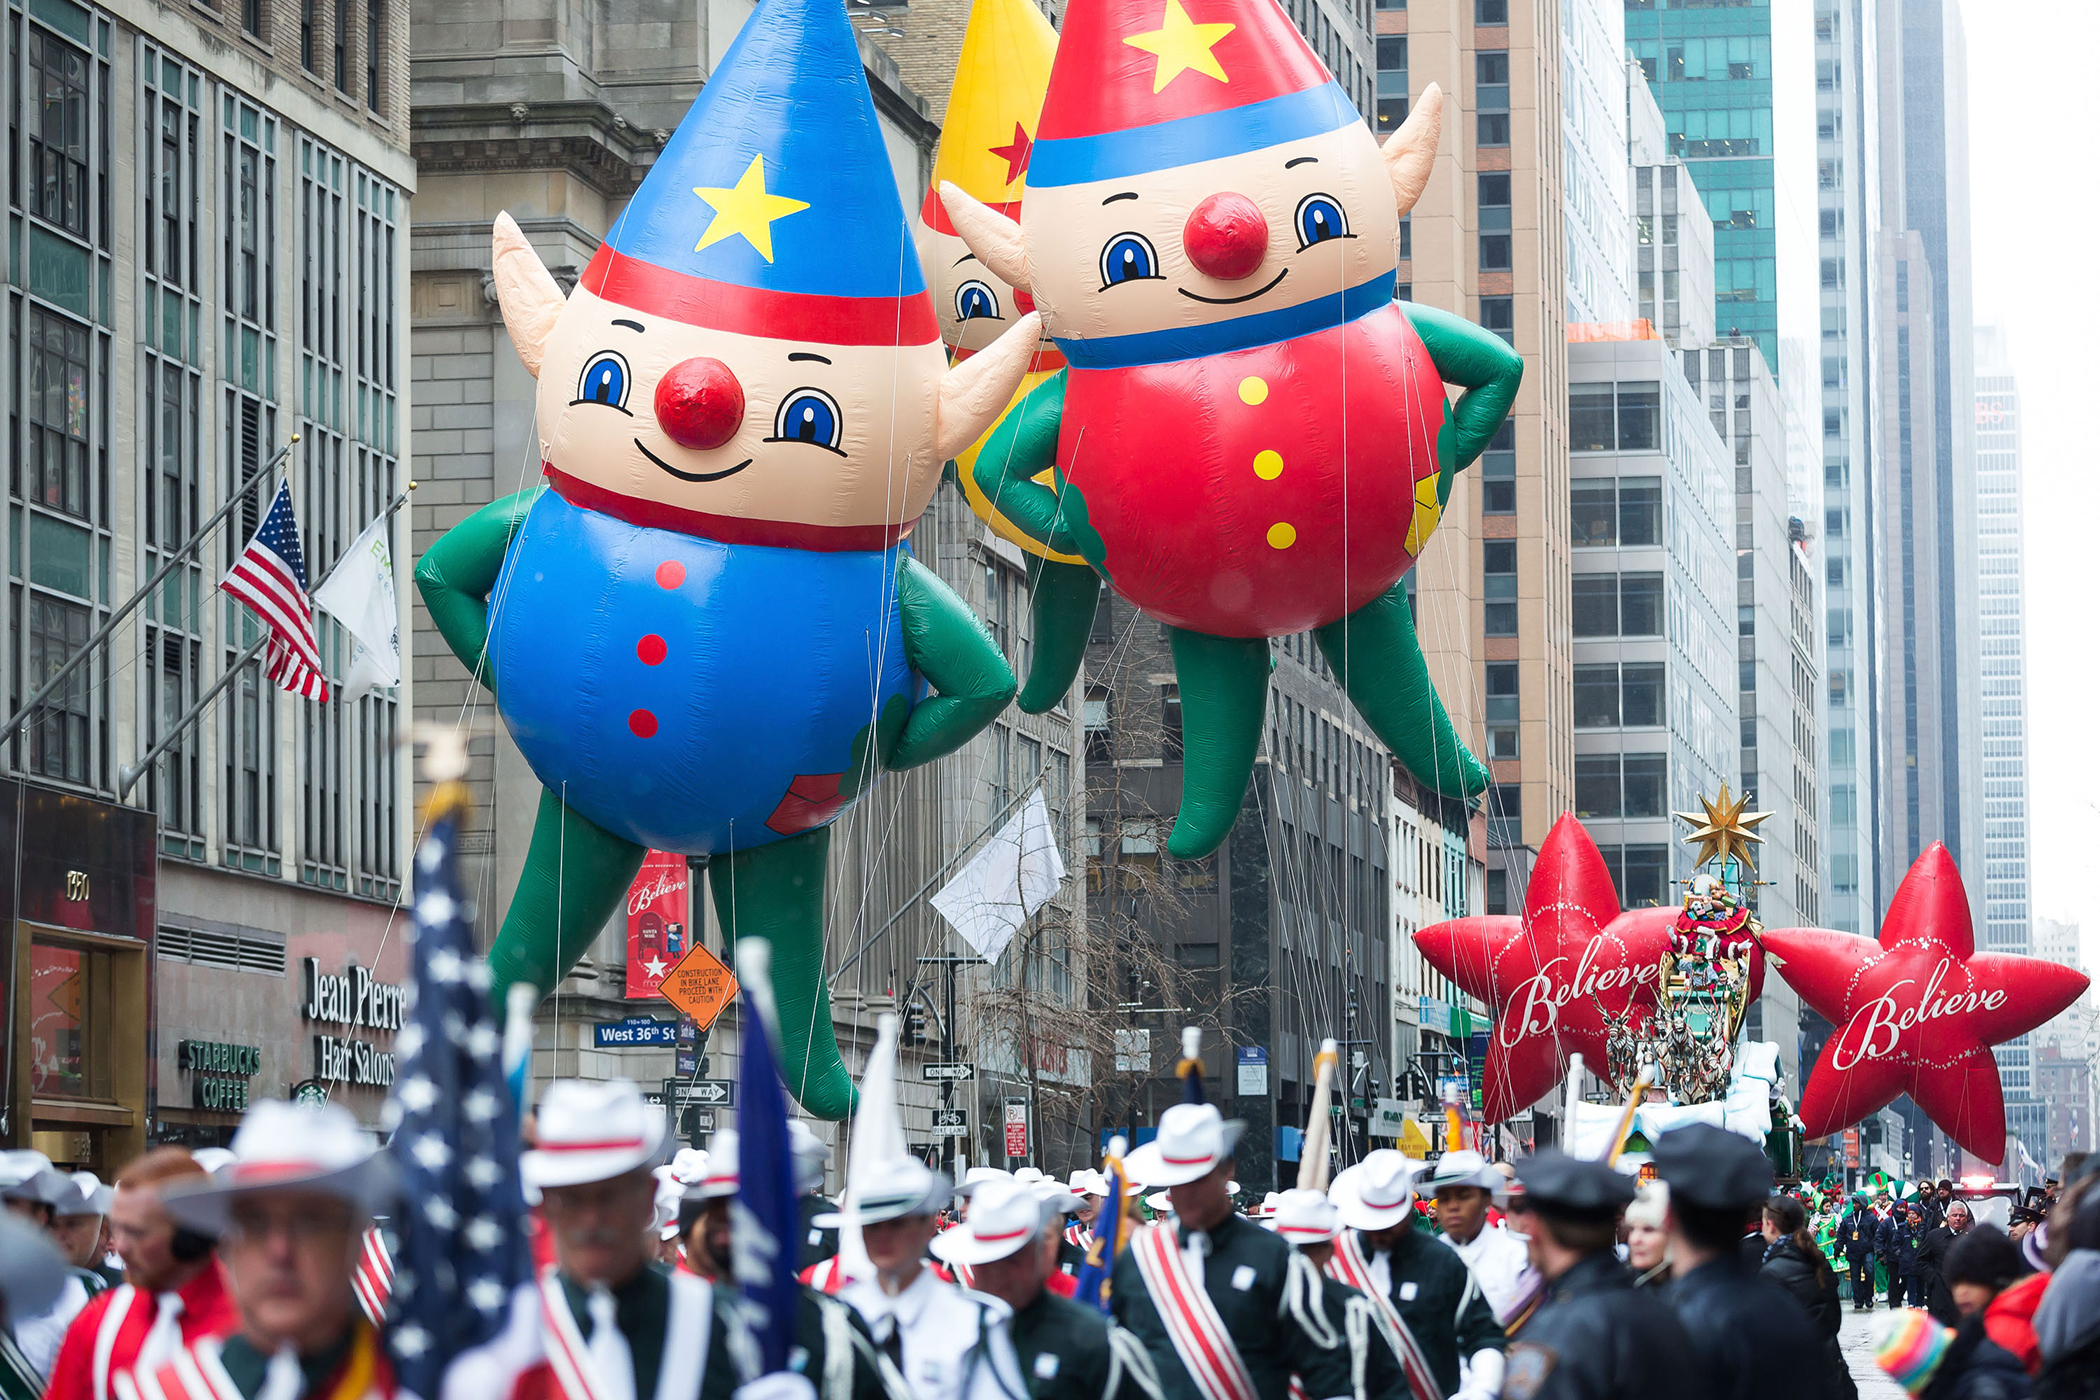 How to Watch the 2017 Macy's Thanksgiving Day Parade for Free